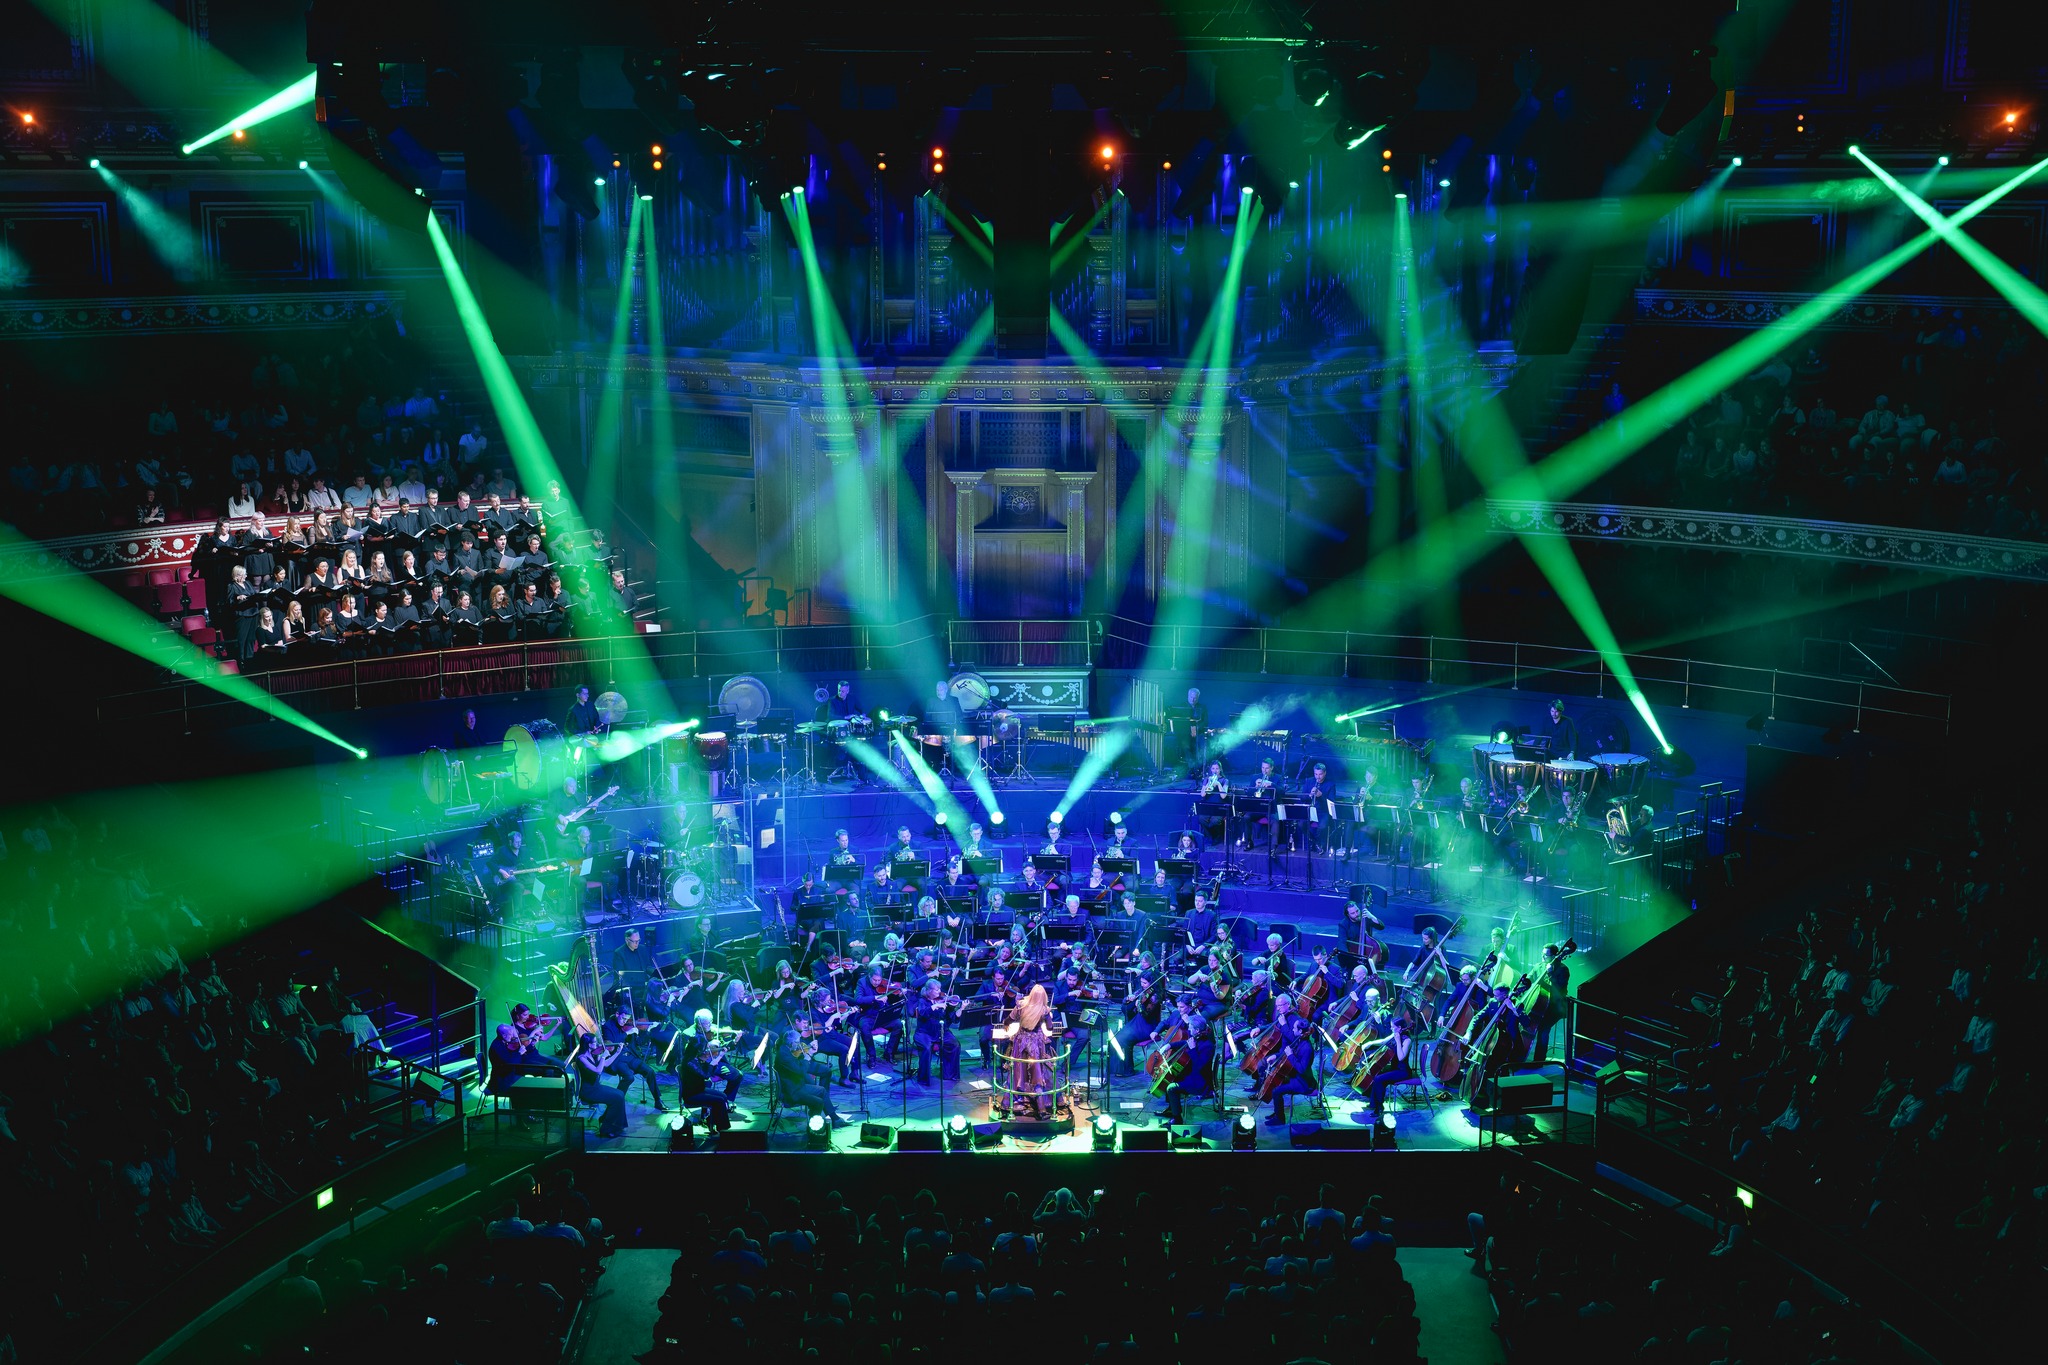 The Orchestra on stage at the Royal ALbert Hall with the Cantus Ensemble choir, with strong green beams lighting up the Hall